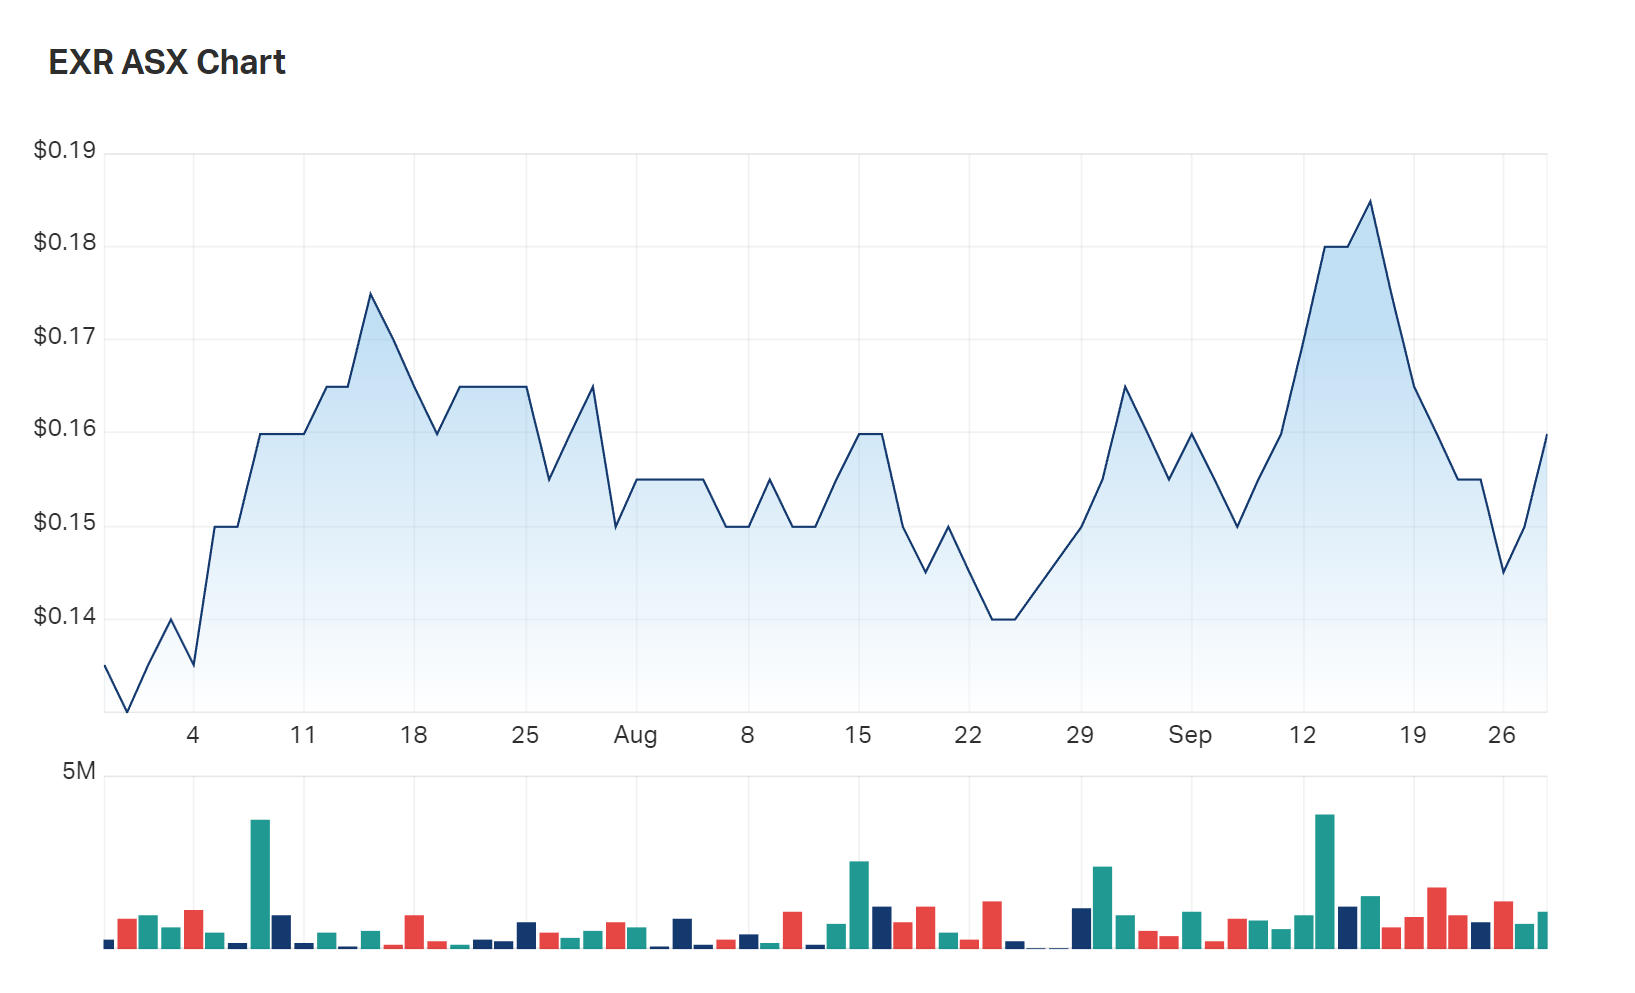 Elixir Energy's three month charts with volume information underlying 